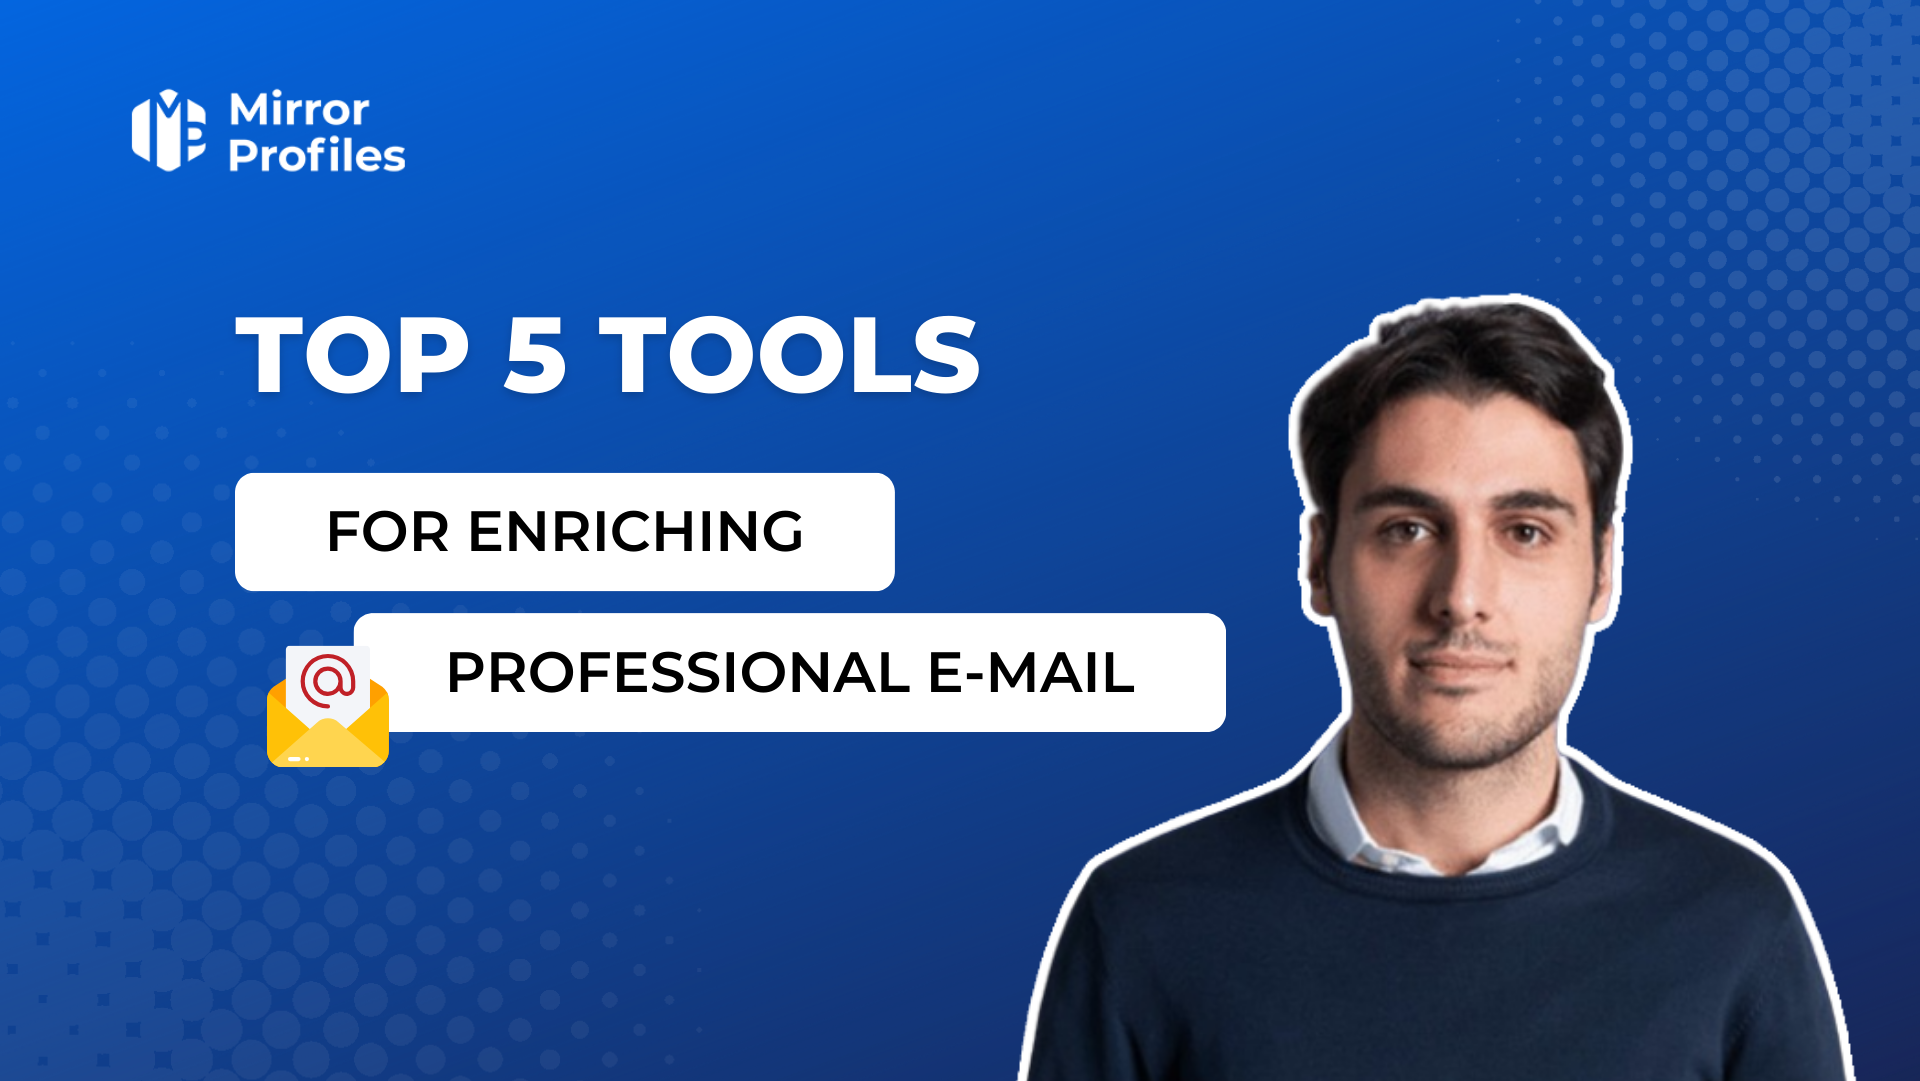 Top 5 tools for enriching professional e-mail